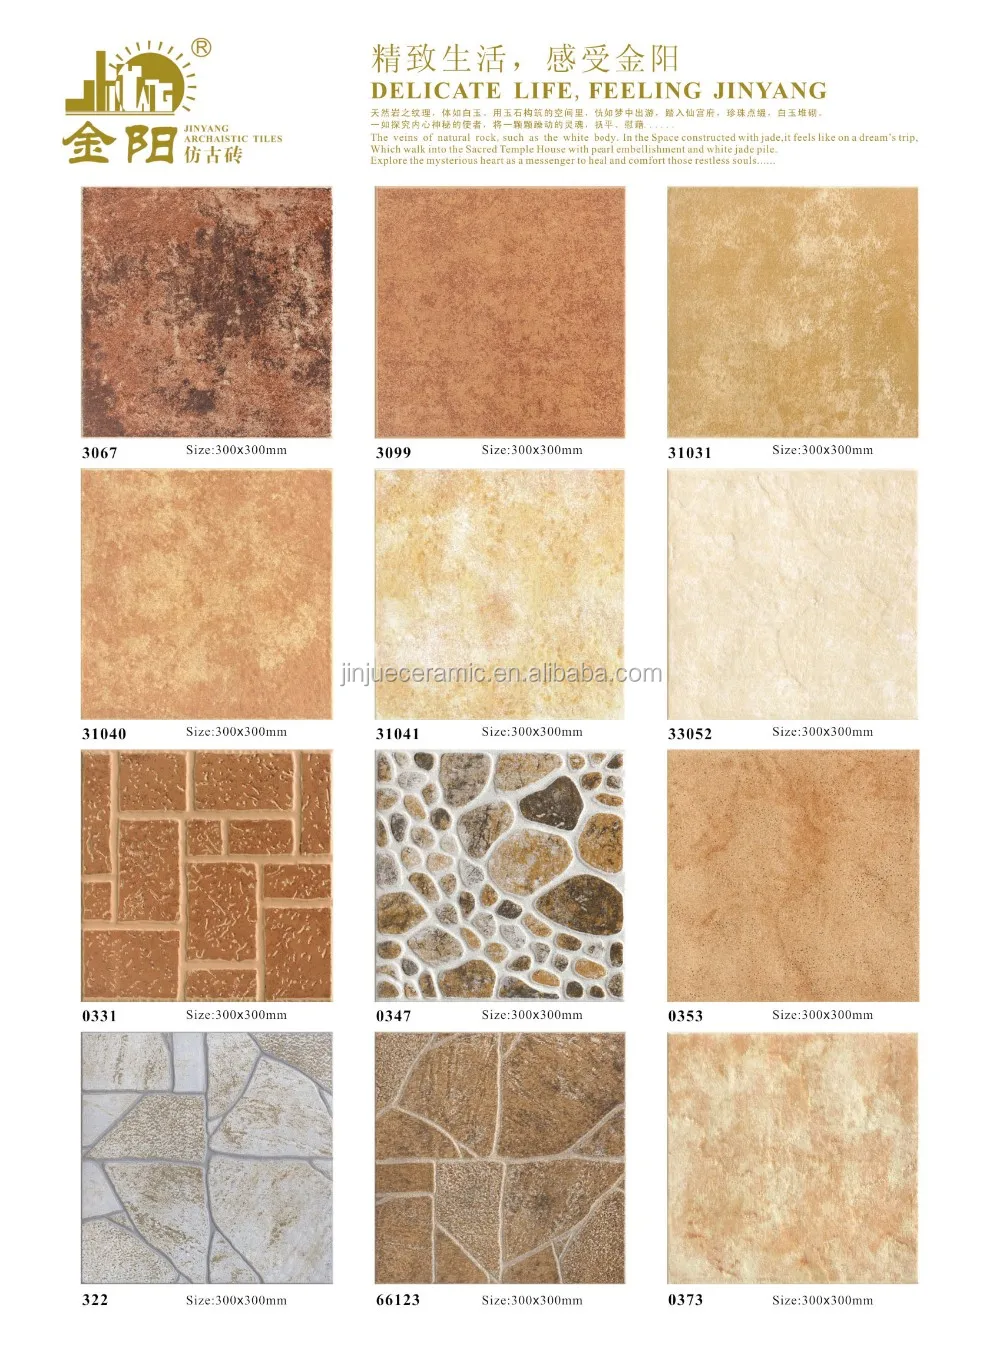 Bathroom Wall Indian Manufacturer Malaysia Ceramic Floor Tiles In Philippines Buy Ceramic Floor Tiles In Philippines Bathroom Wall Tiles Indian Ceramic Tiles Flooring Tile Ceramic Tile Manufacturer Malaysia Product On Alibaba Com